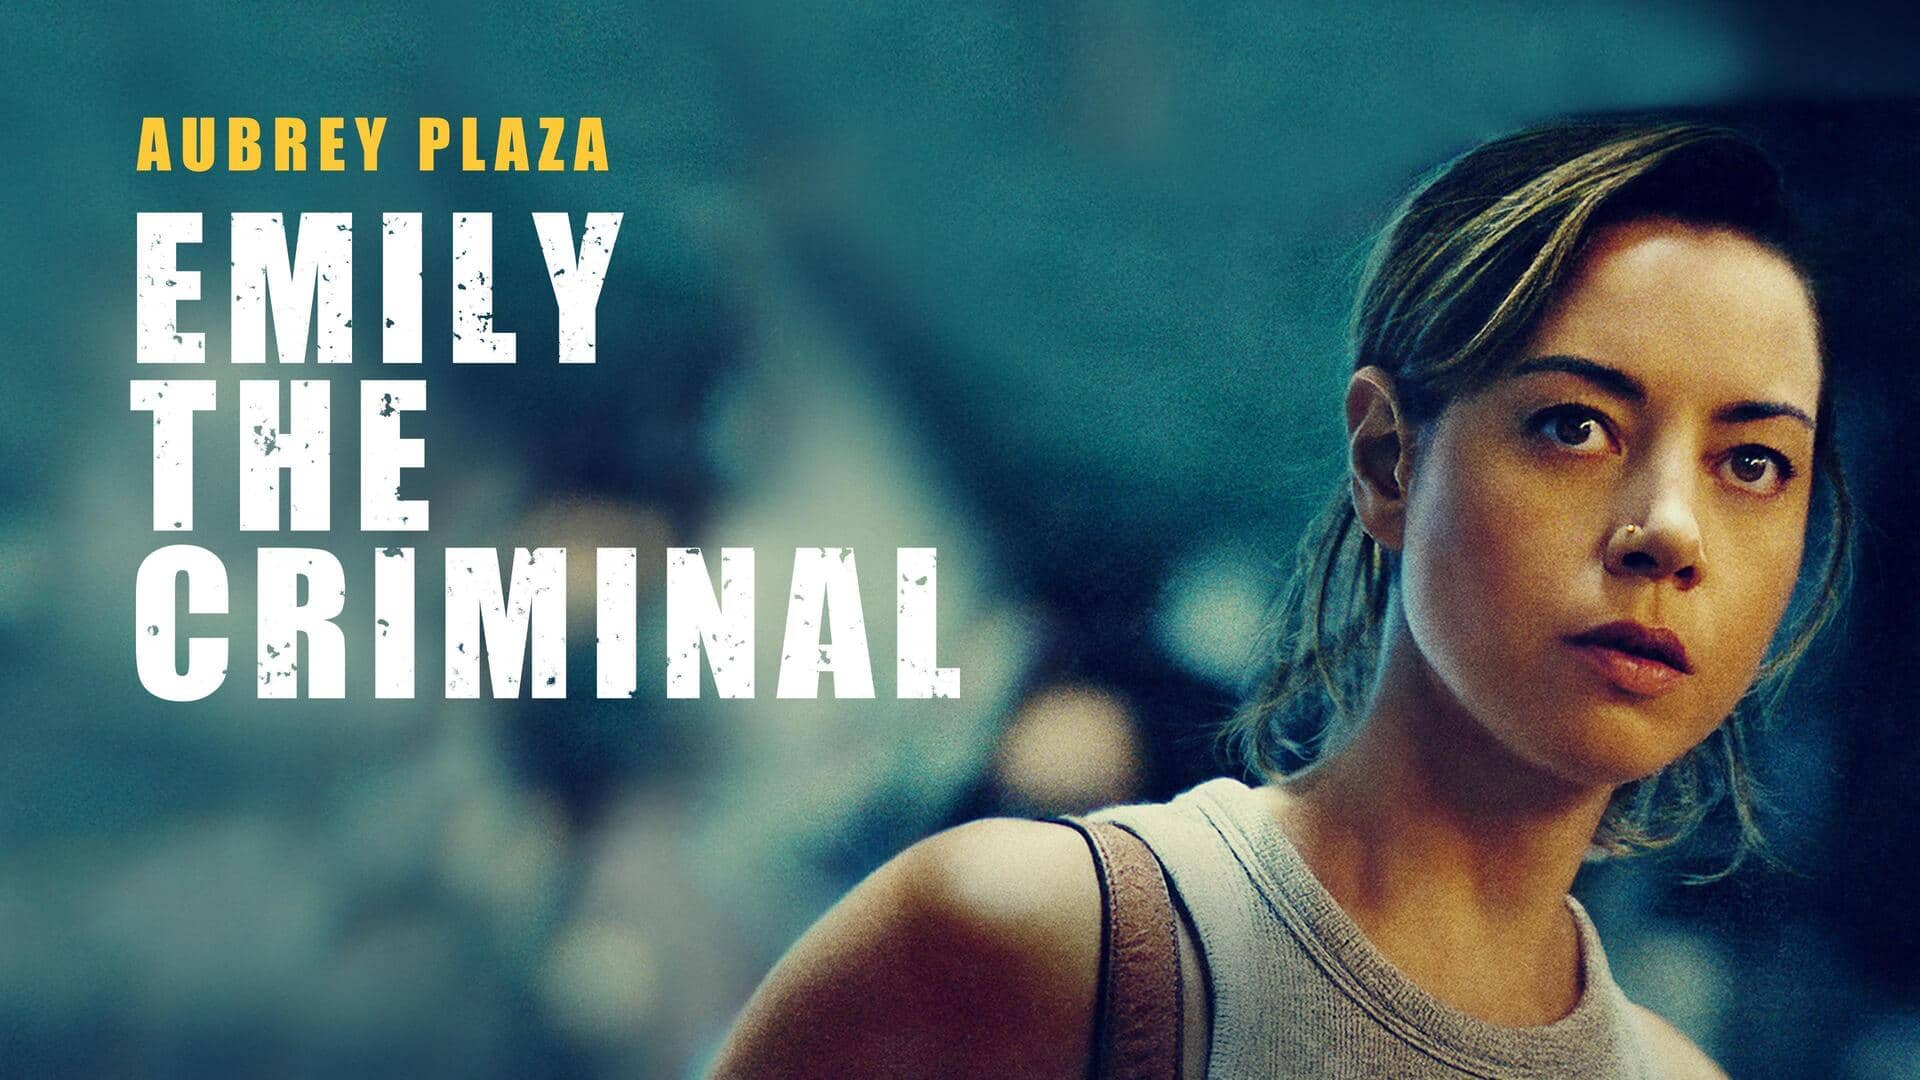 NewsBytes Recommends: 'Emily the Criminal'—Aubrey Plaza powers this thrilling ride